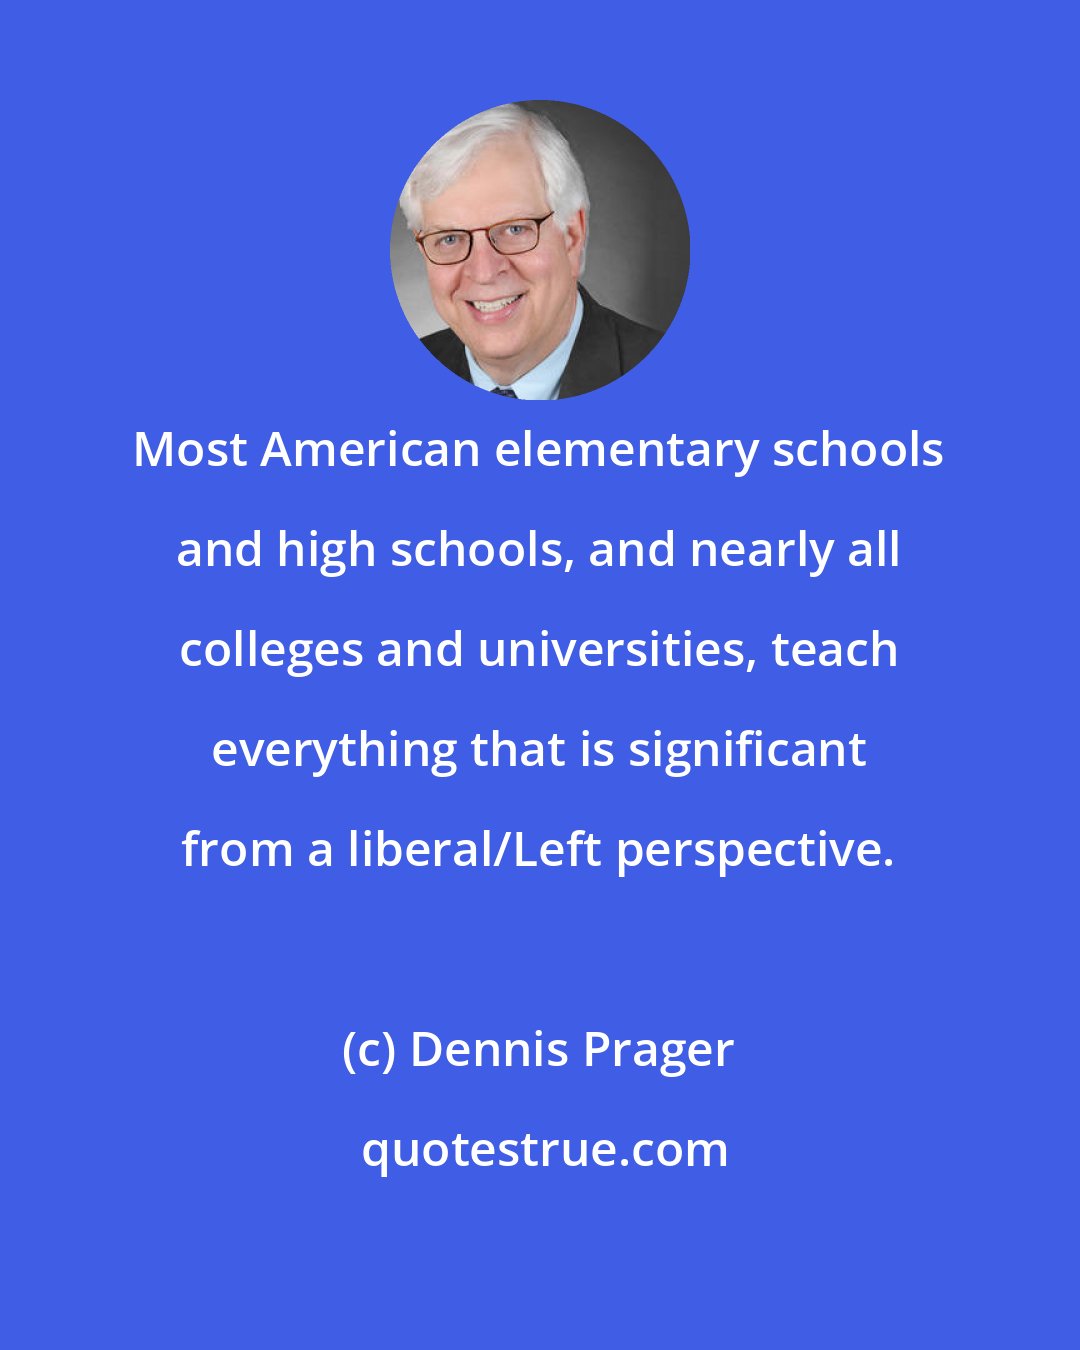 Dennis Prager: Most American elementary schools and high schools, and nearly all colleges and universities, teach everything that is significant from a liberal/Left perspective.